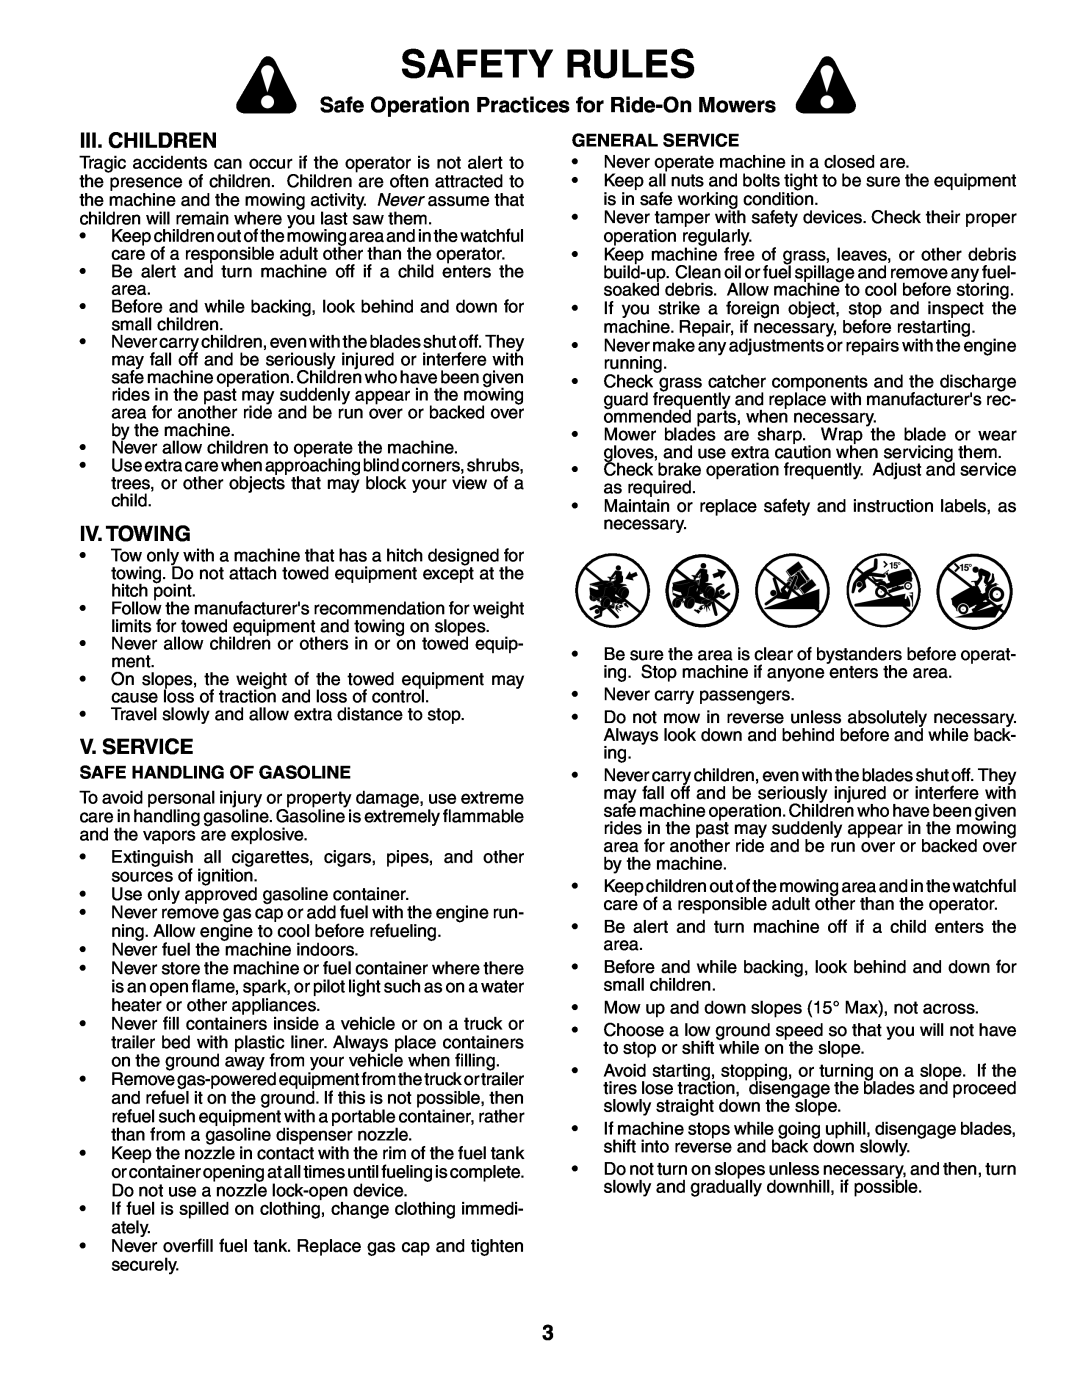 Poulan 401152 manual Iii. Children, Iv. Towing, V. Service, Safety Rules, Safe Operation Practices for Ride-On Mowers 